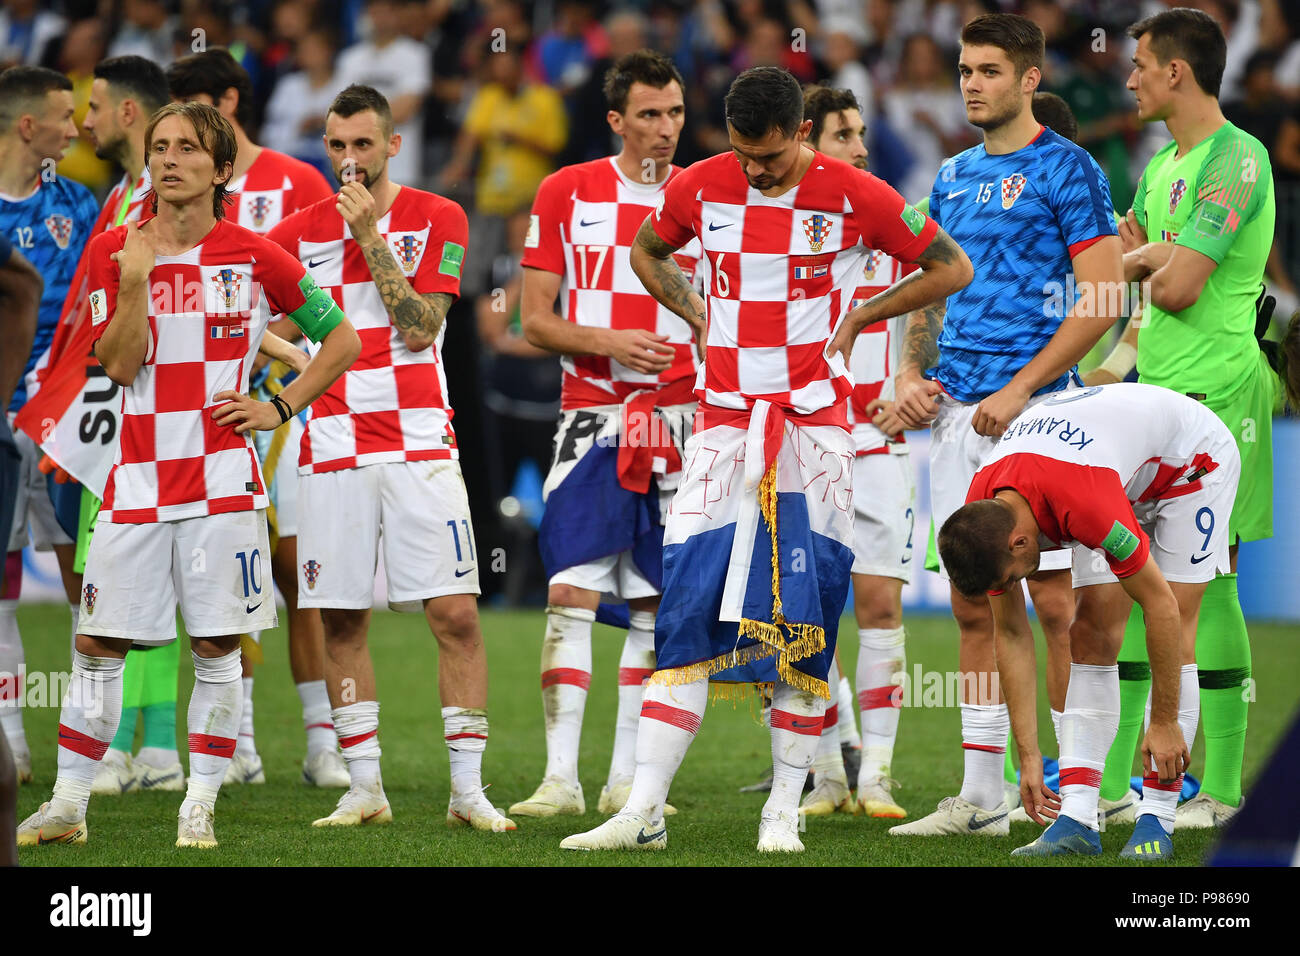 LUKA MODRIC (CRO), Marcelo BROZOVIC (CRO), Mario MANDZUKIC (CRO), Dejan LOVREN (CRO), Andrej KRAMARIC (CRO), disappointment, frustrated, disappointed, frustrated, dejected, action. France (FRA) - Croatia (CRO) 4-2, Final, Game 64, on 15.07.2018 in Moscow; Luzhniki Stadium. Football World Cup 2018 in Russia from 14.06. - 15.07.2018. | usage worldwide Stock Photo